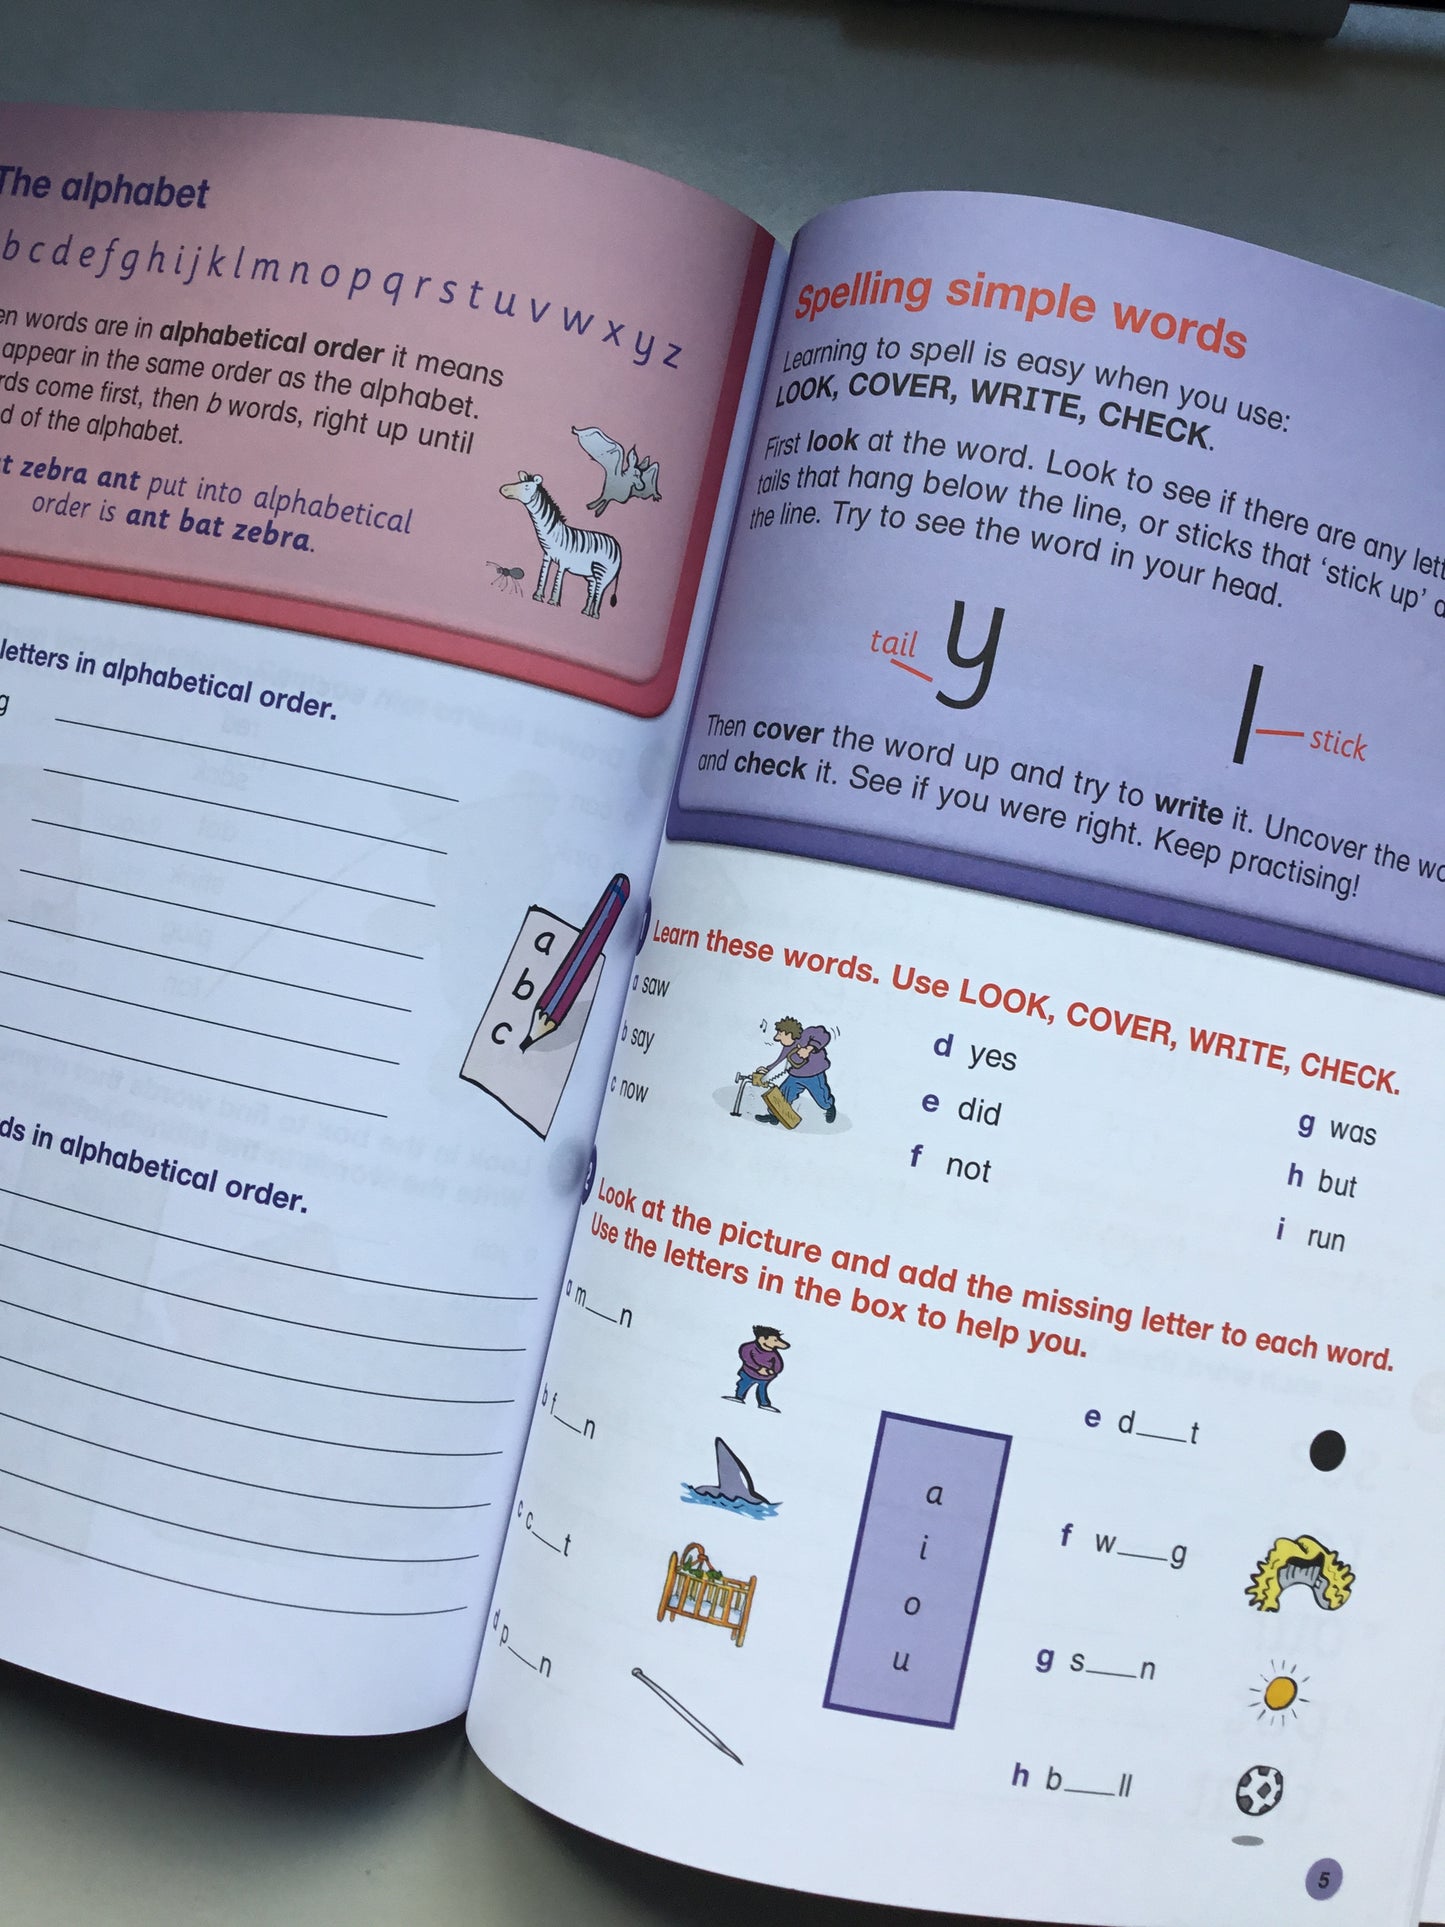 Letts Make it Easy Maths and English Age 5-6